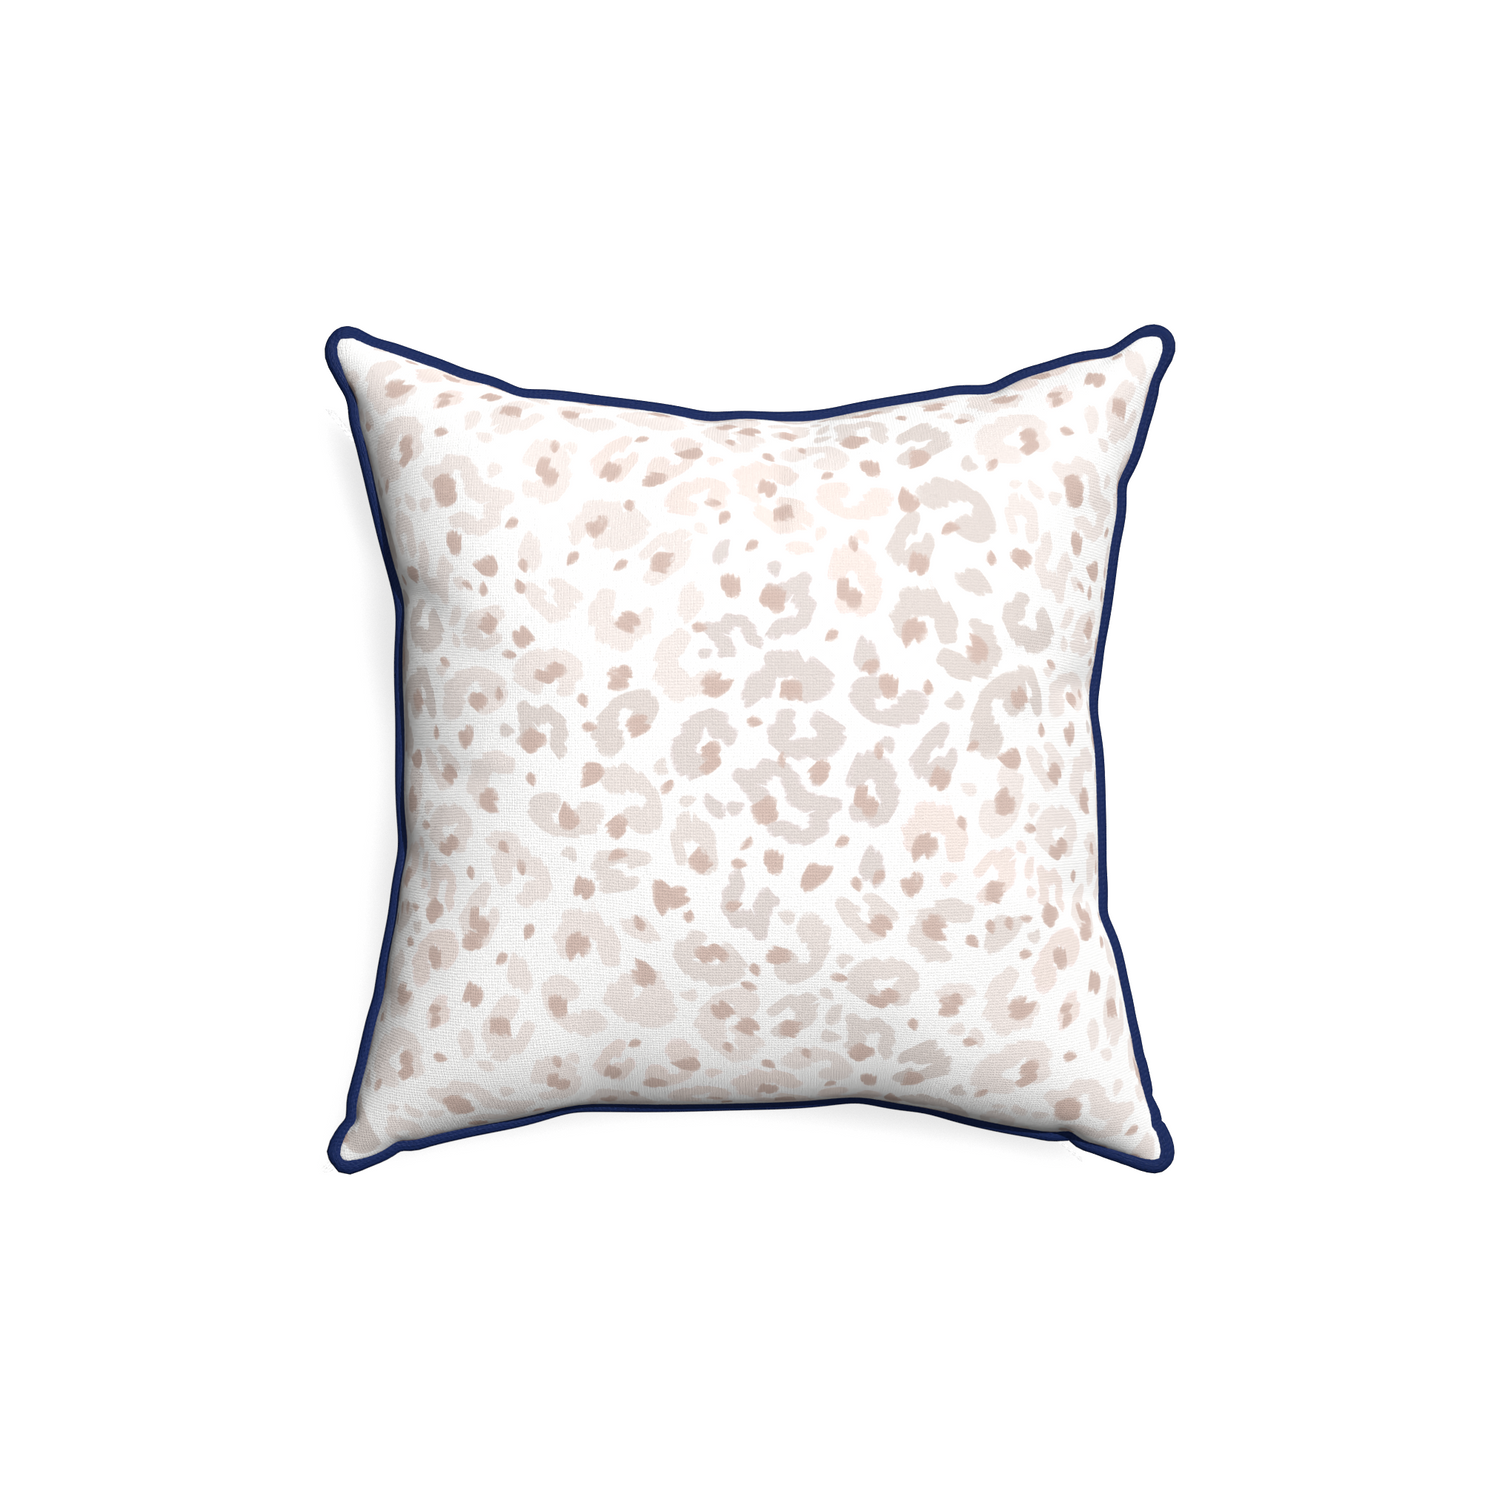 18-square rosie custom beige animal printpillow with midnight piping on white background